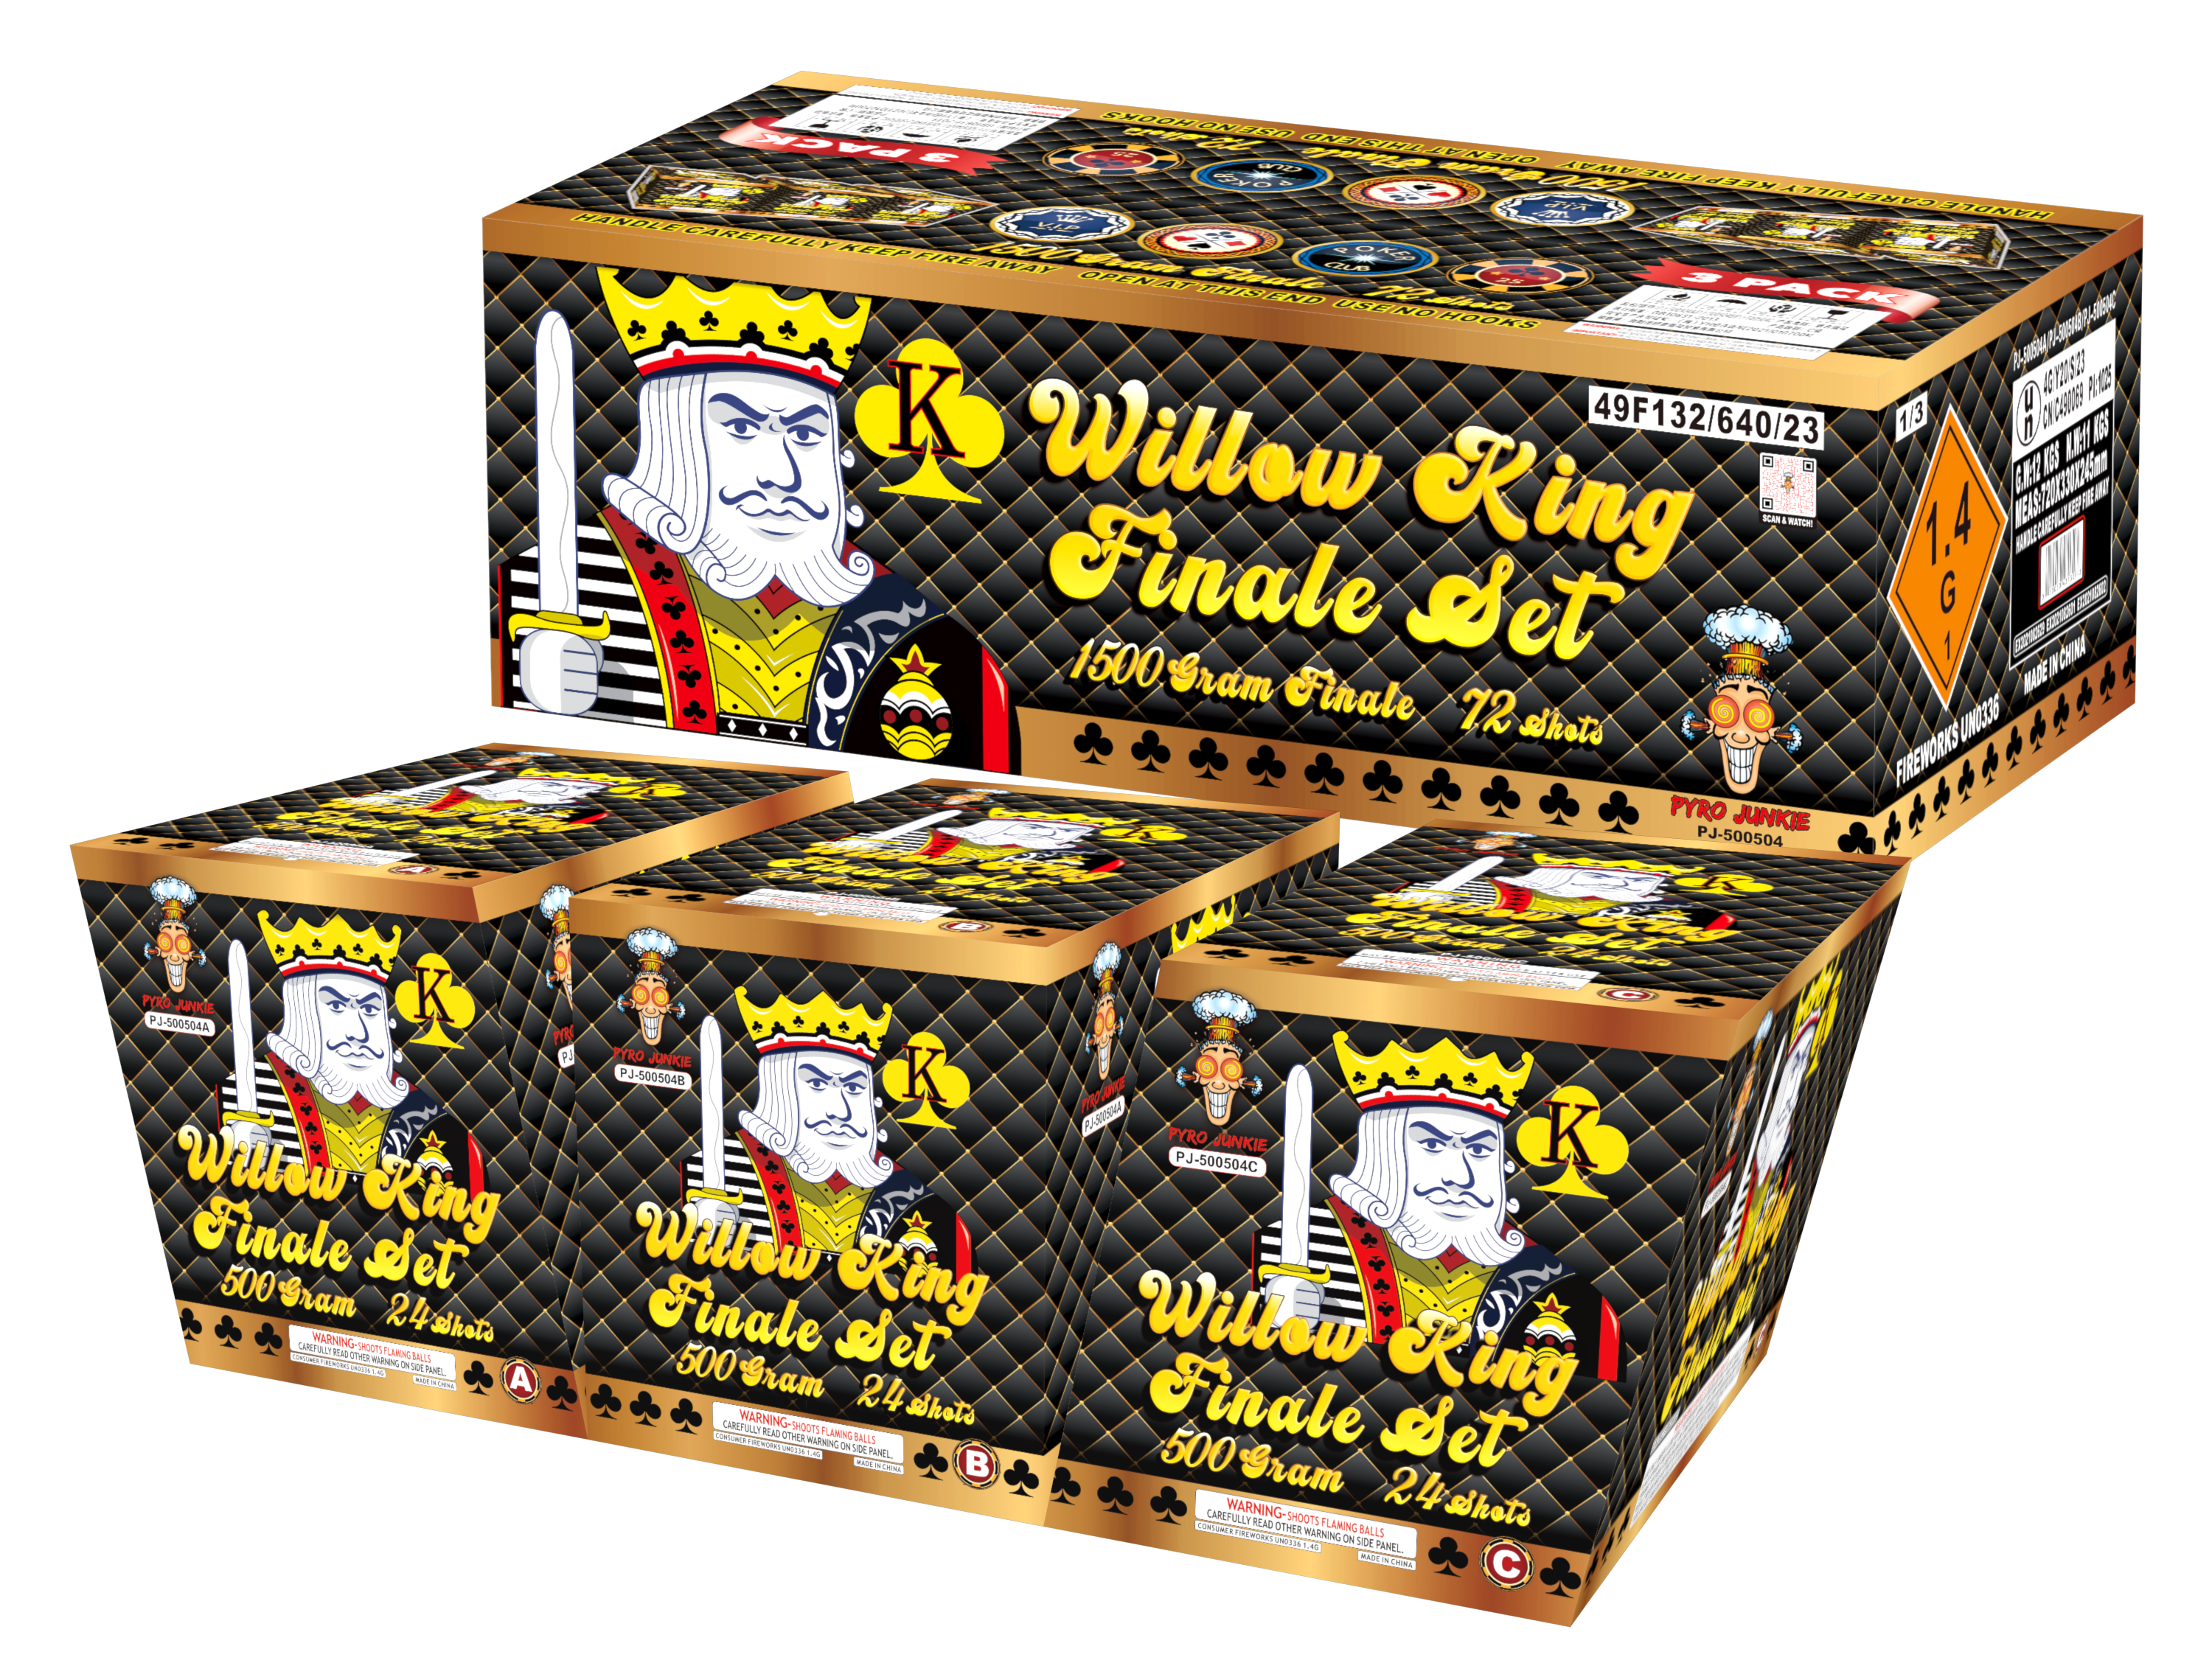 Willow King Finale Set By PJ (Case - 1 Units)